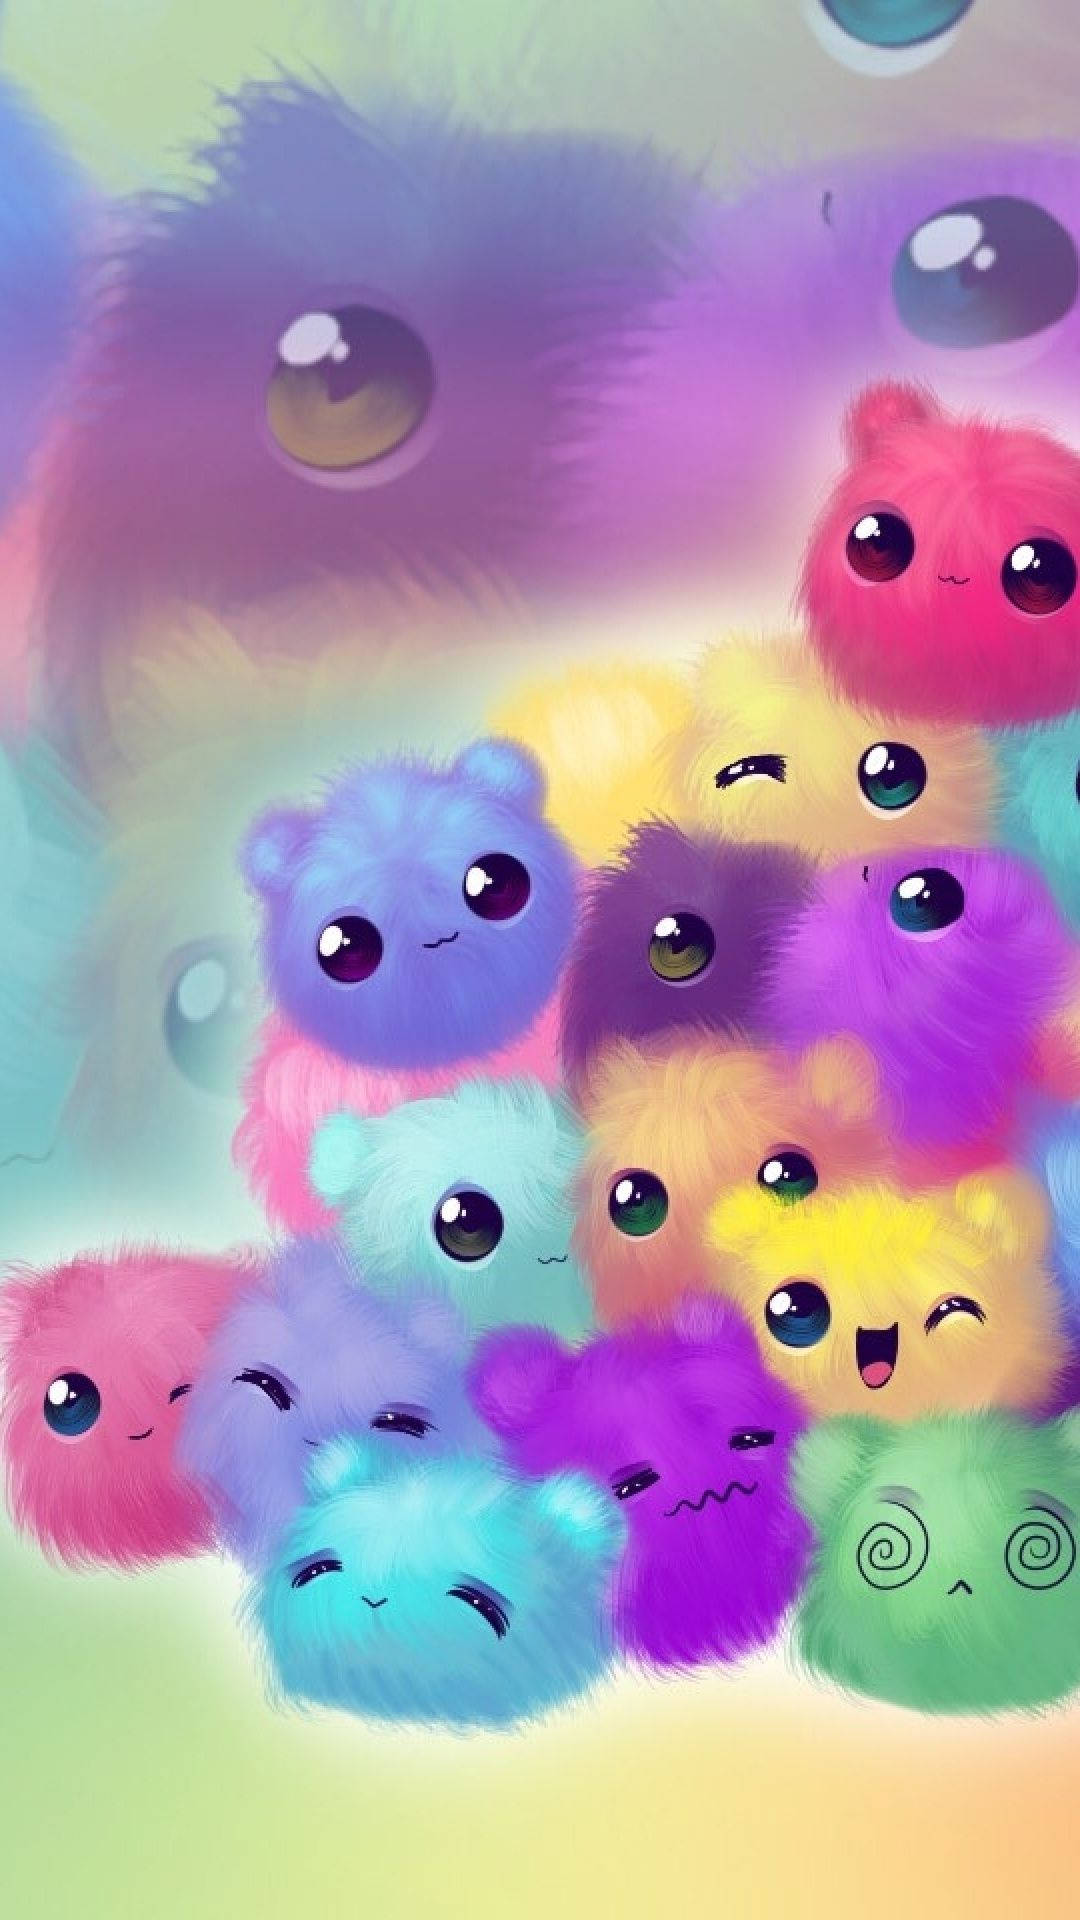 Cute Colorful Fuzzy Creatures